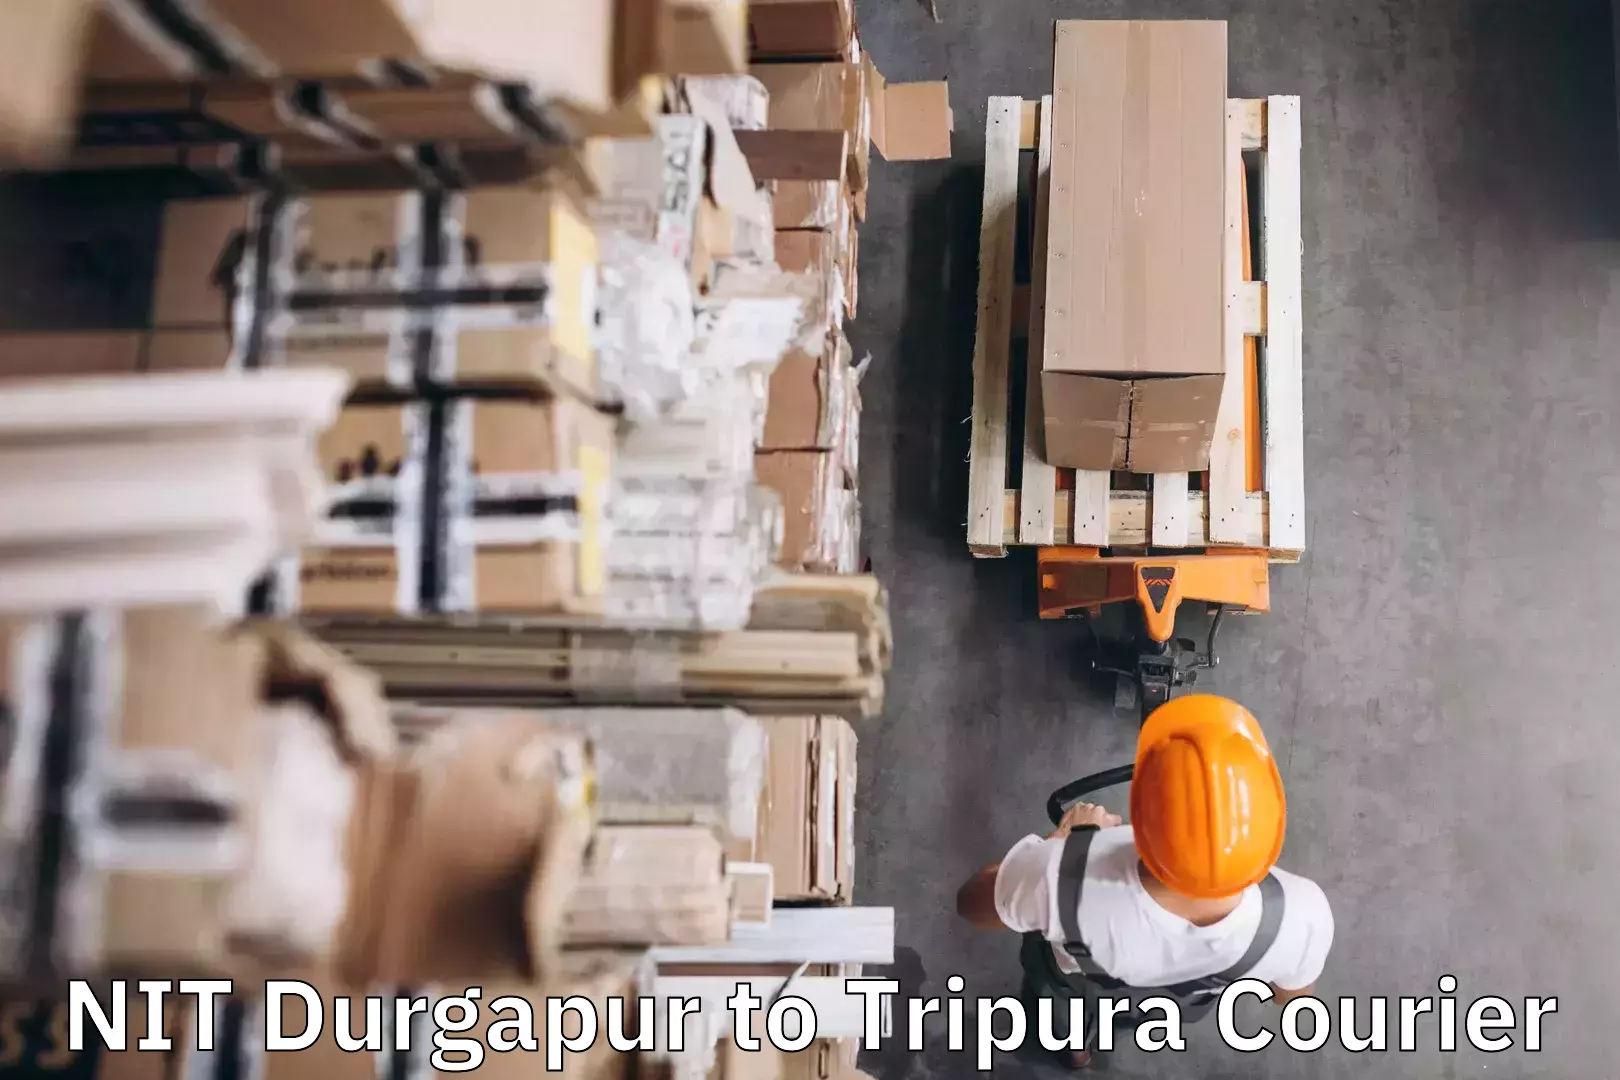 Holiday season luggage delivery in NIT Durgapur to Udaipur Tripura